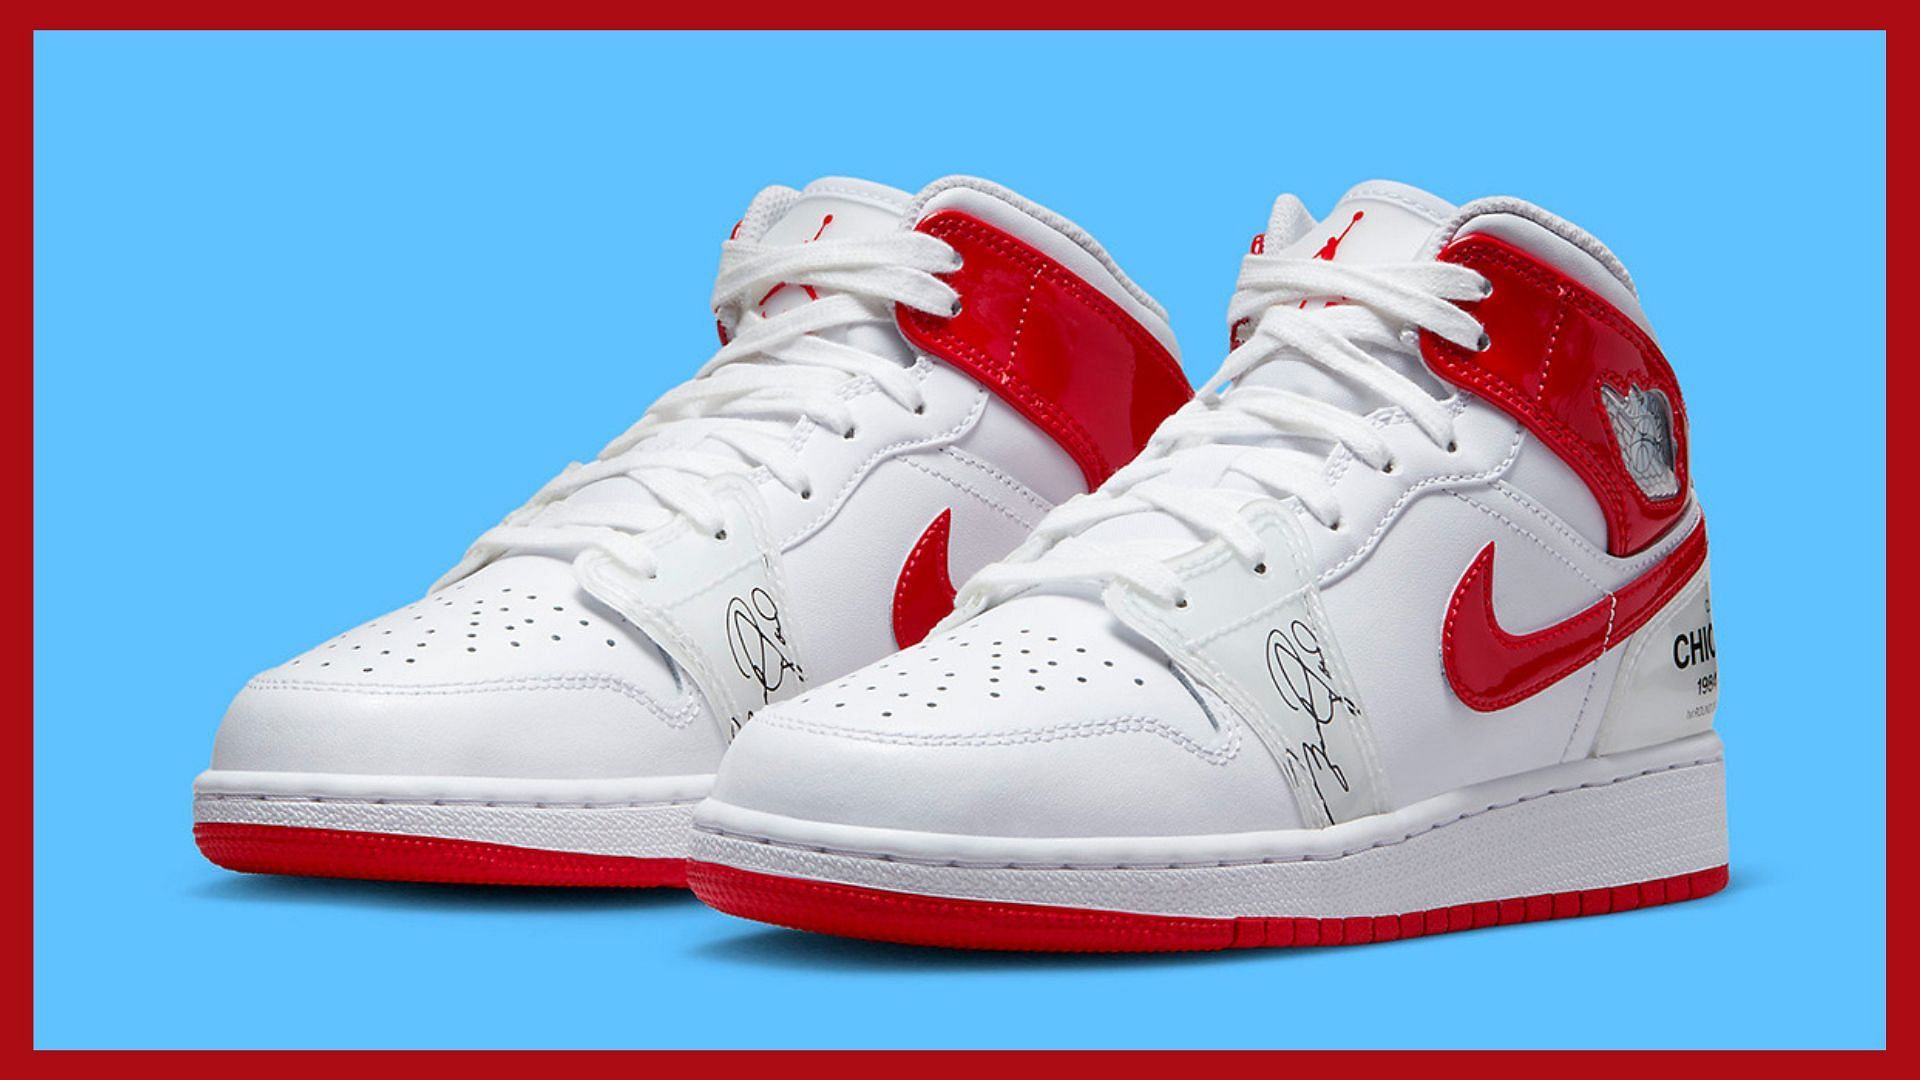 Where to buy Air Jordan 1 Mid “Rookie Season” shoes? Price and more